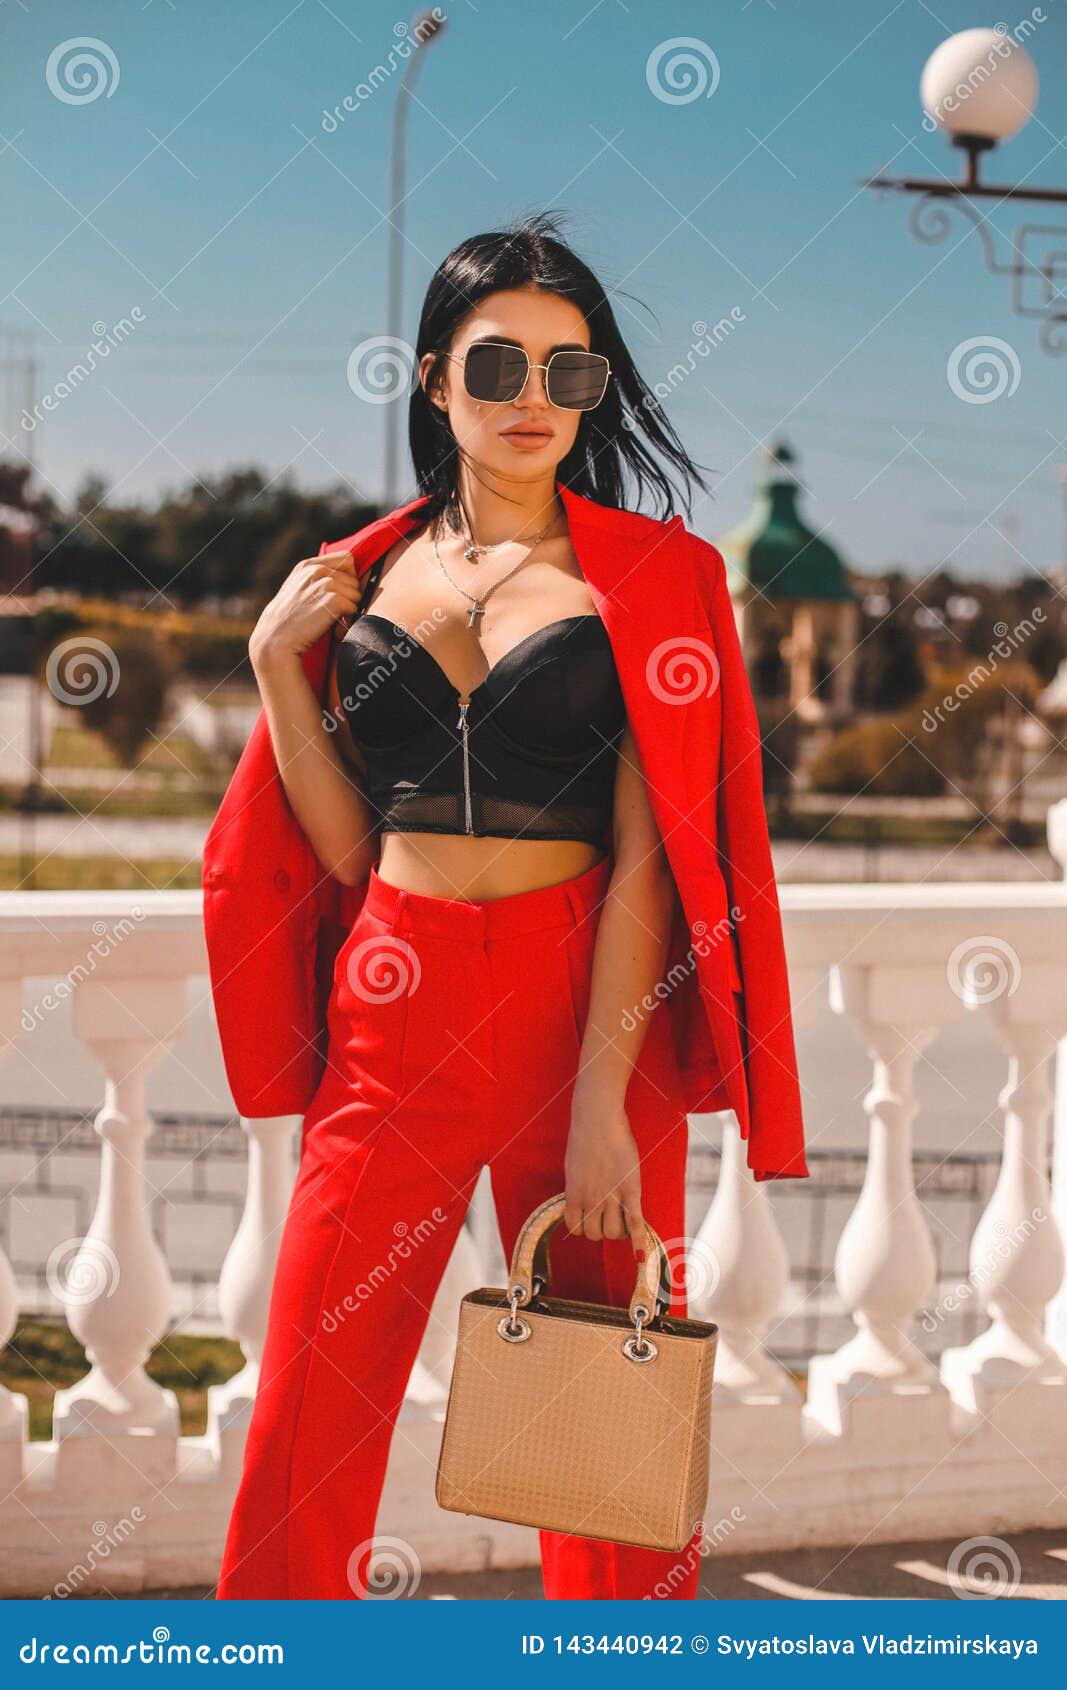 Woman with Dark Hair in Elegant Red Suit with Accessories Stock Photo -  Image of bright, beautiful: 143440942